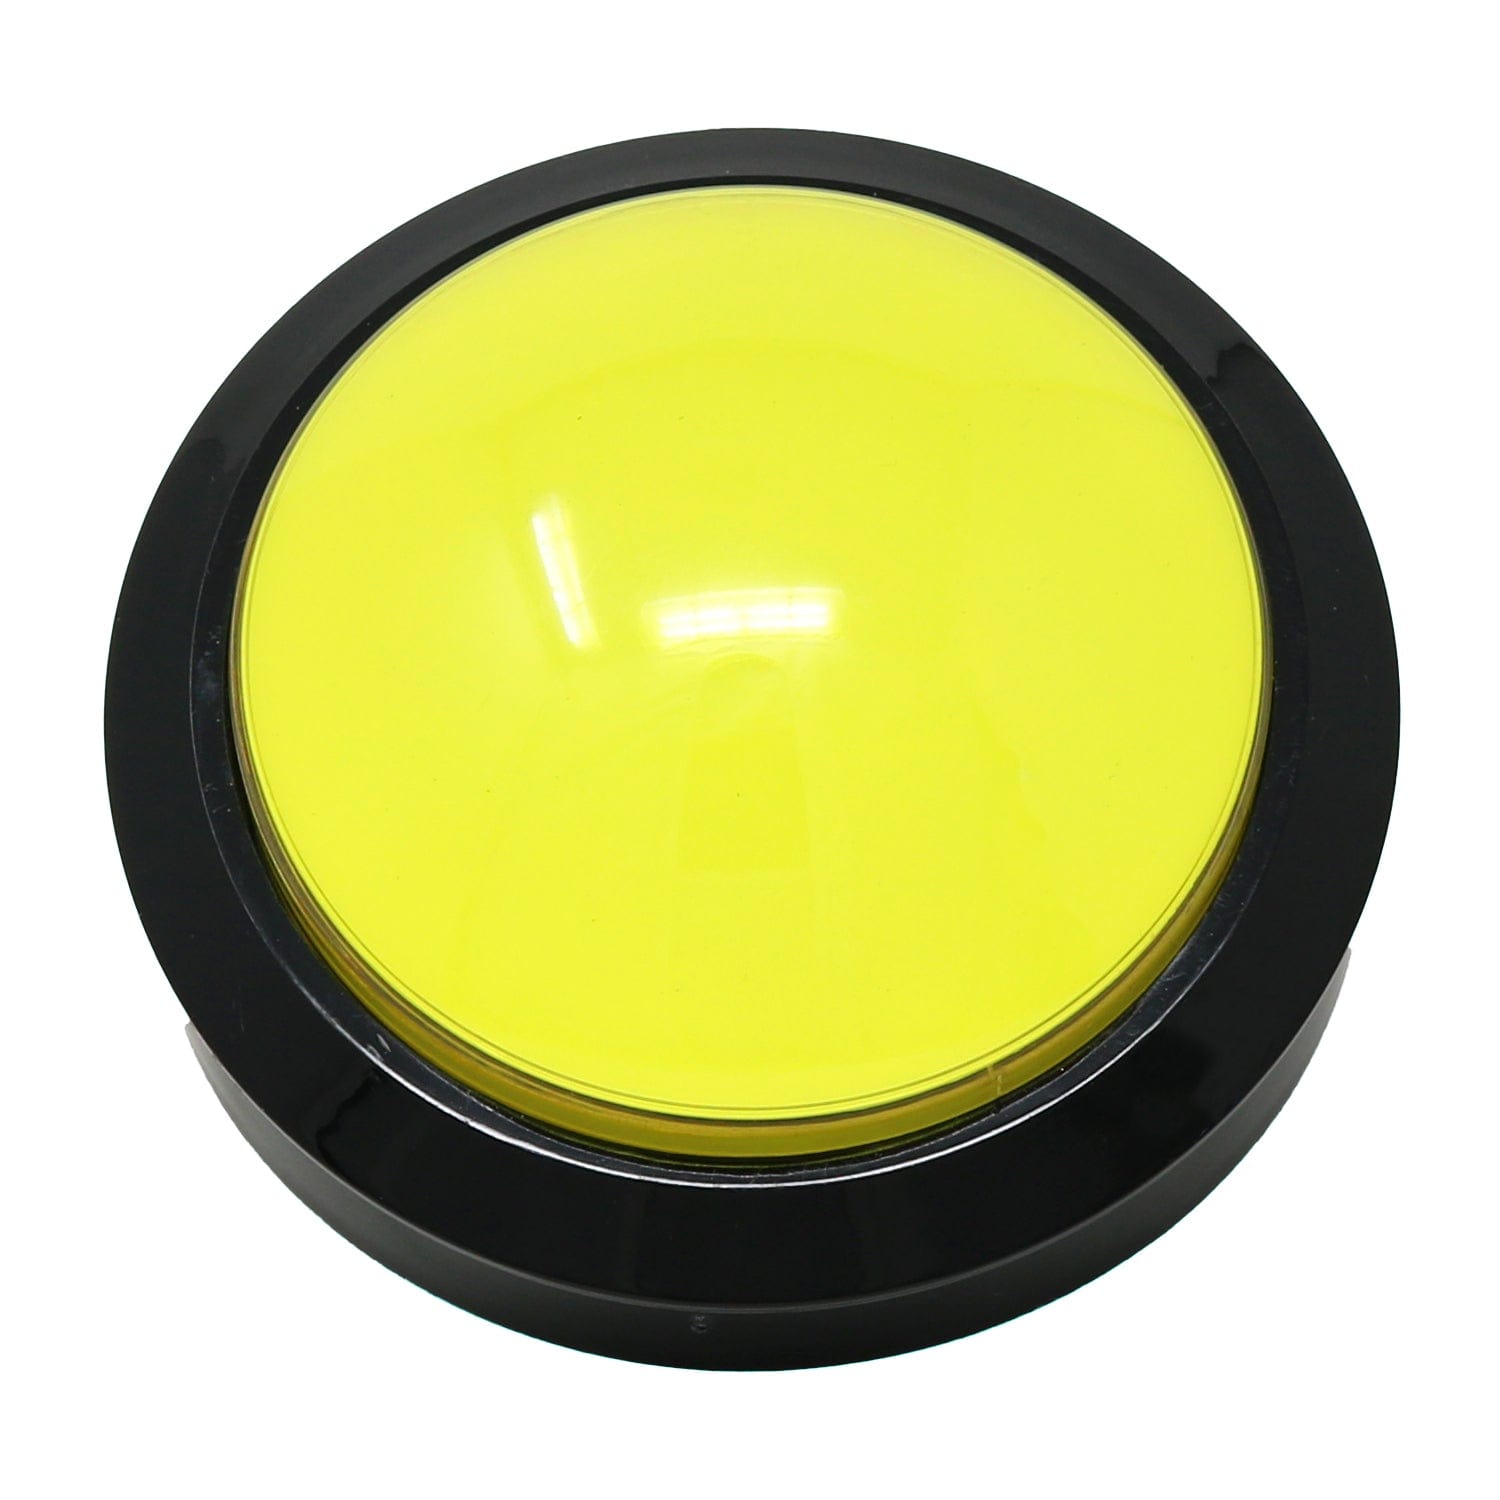 Massive Arcade Button with LED - 100mm Yellow - The Pi Hut